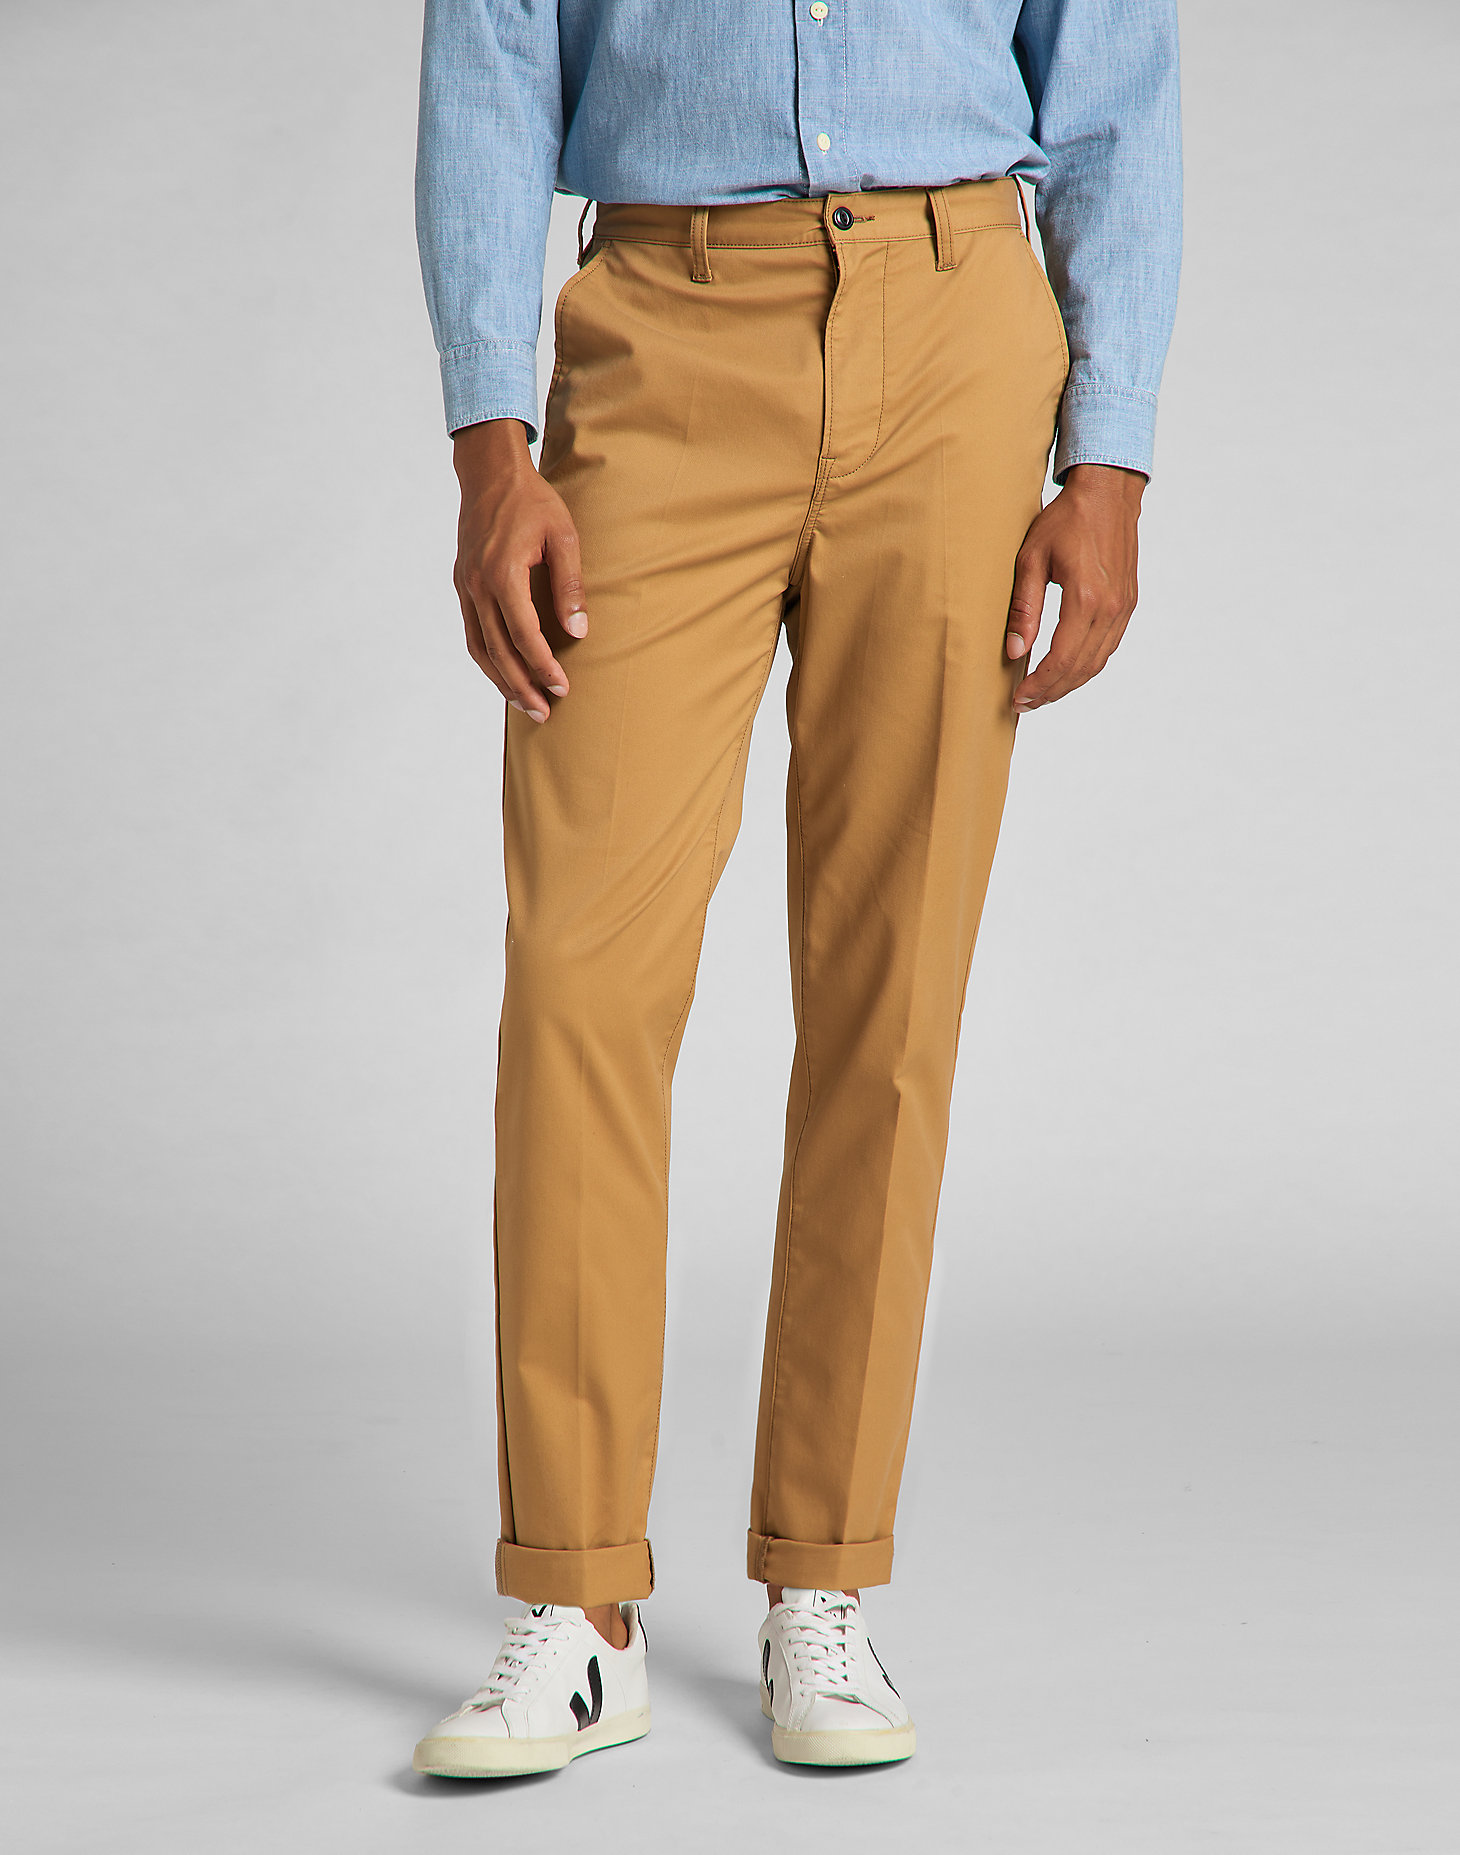 Tapered Chino in Tobacco Brown main view